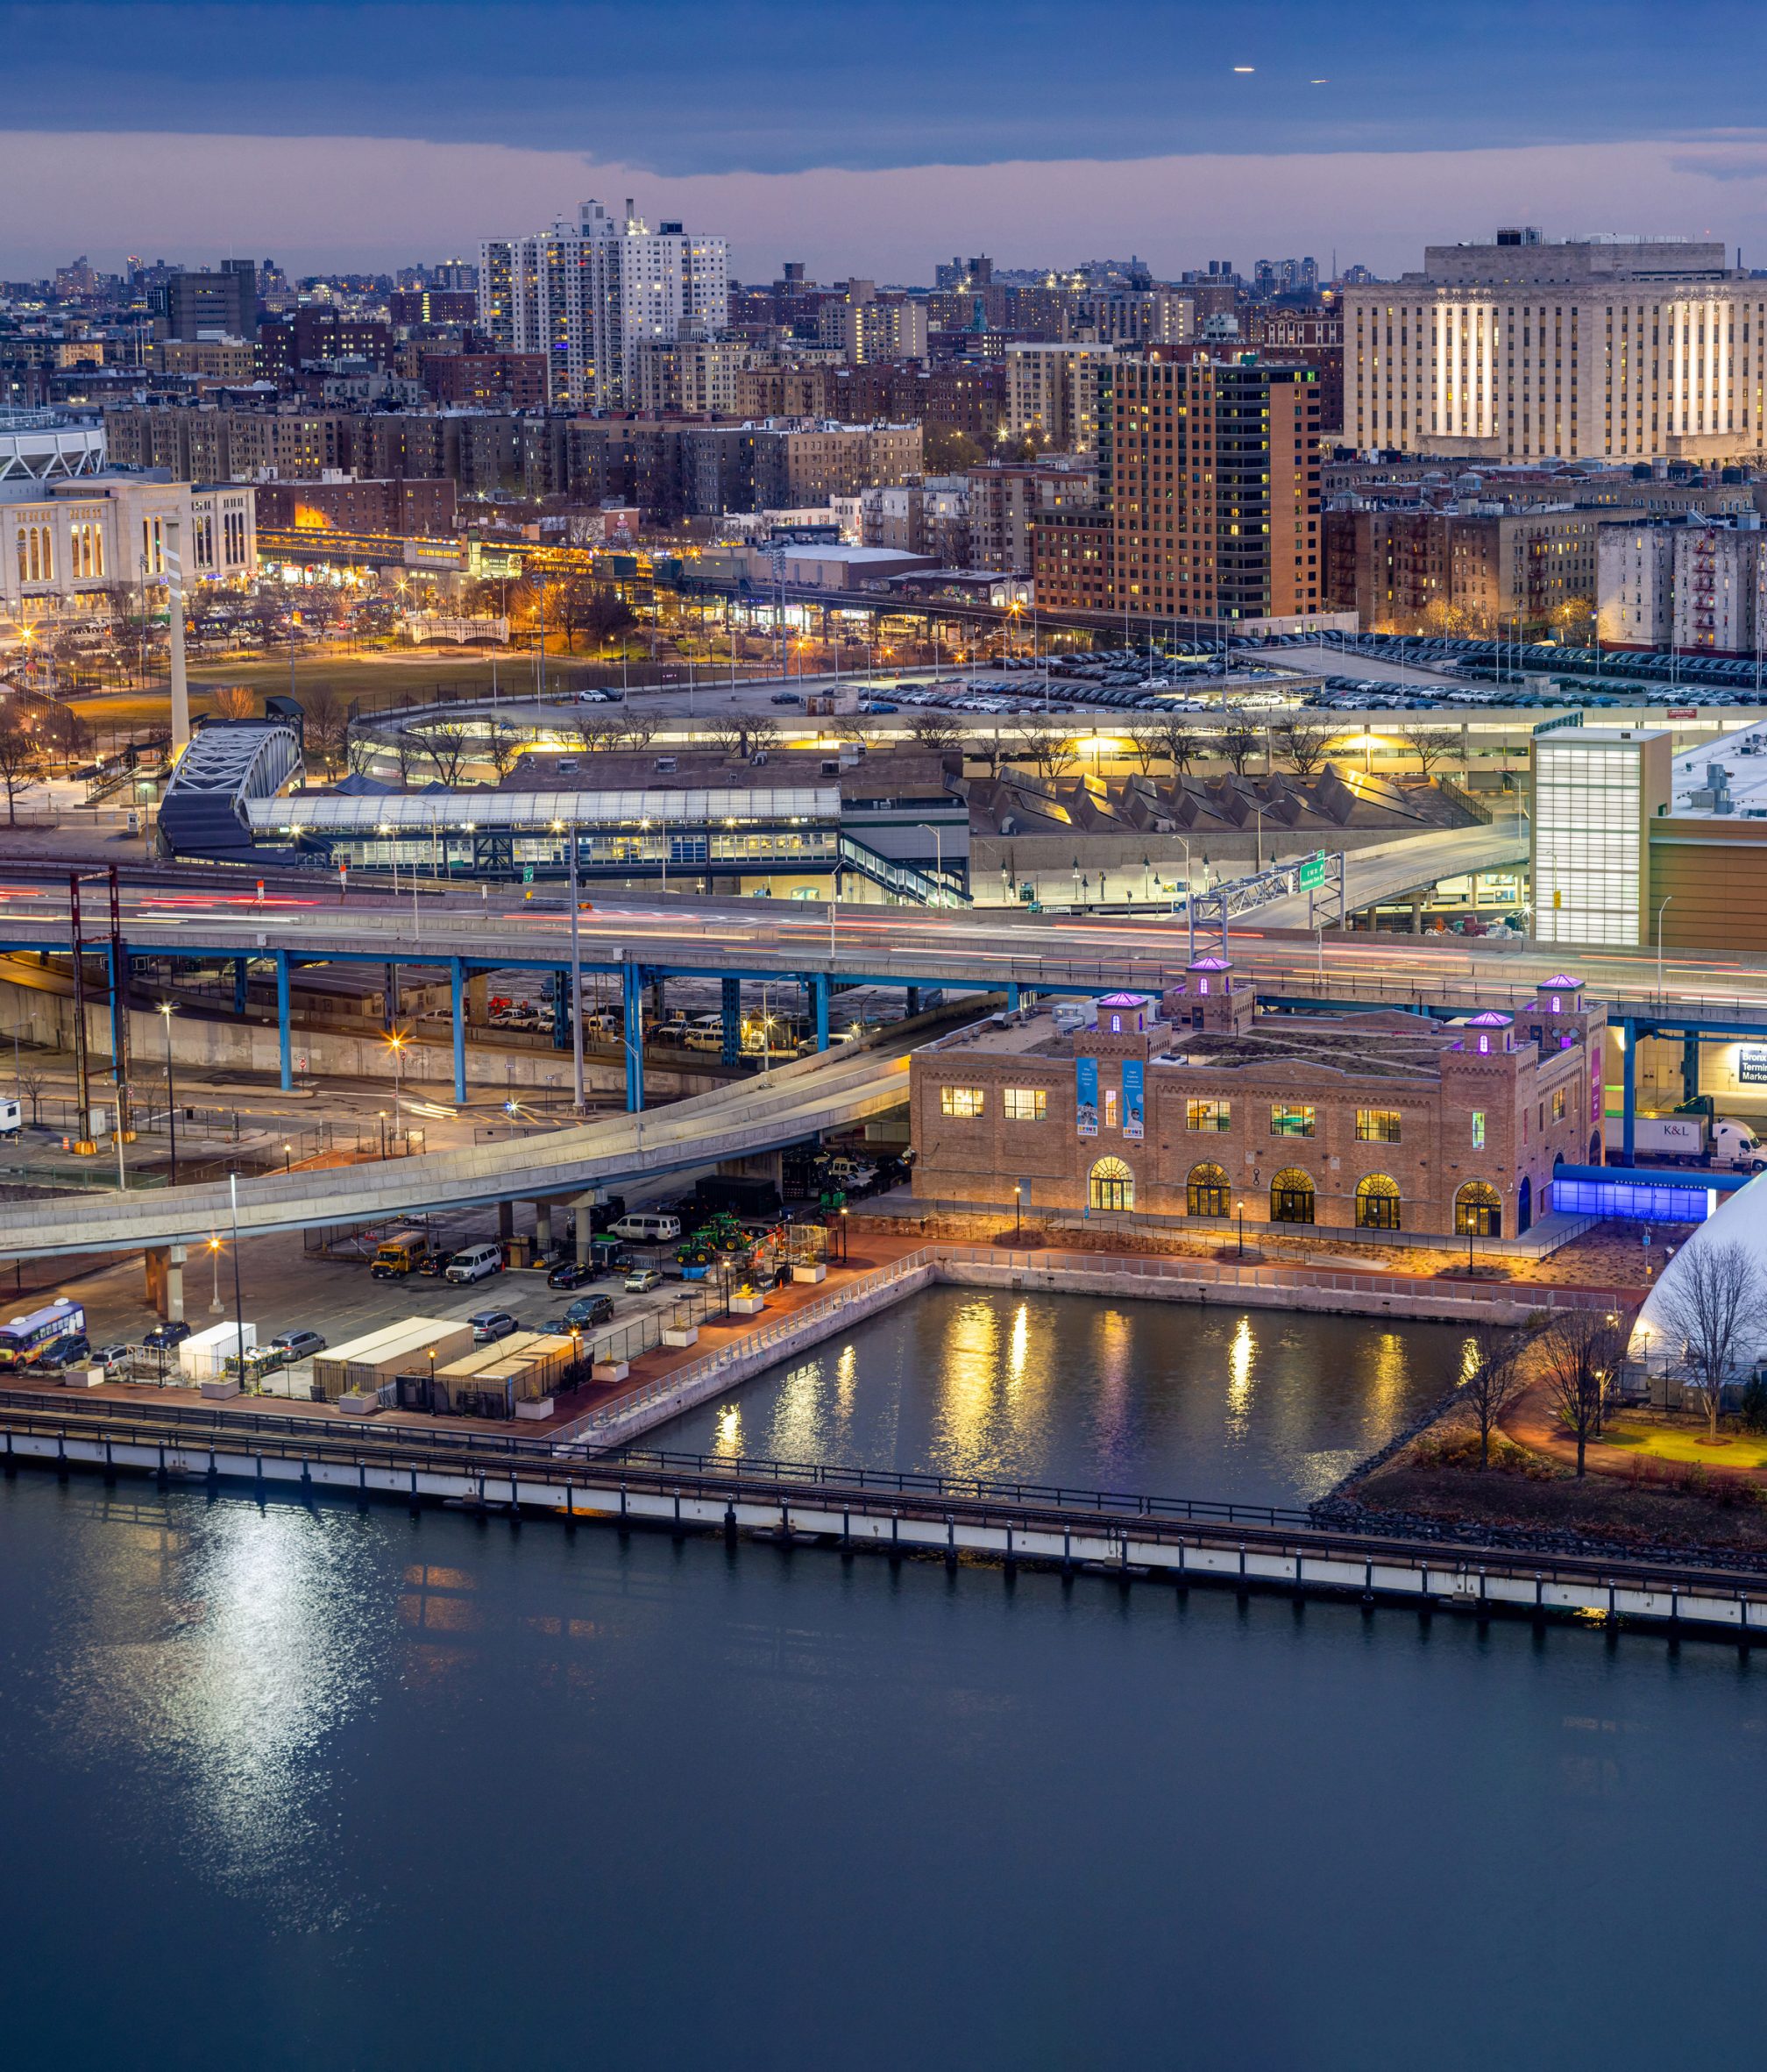 Exterior of the Bronx Children's Museum on O'Neill McVoy on a city waterfront